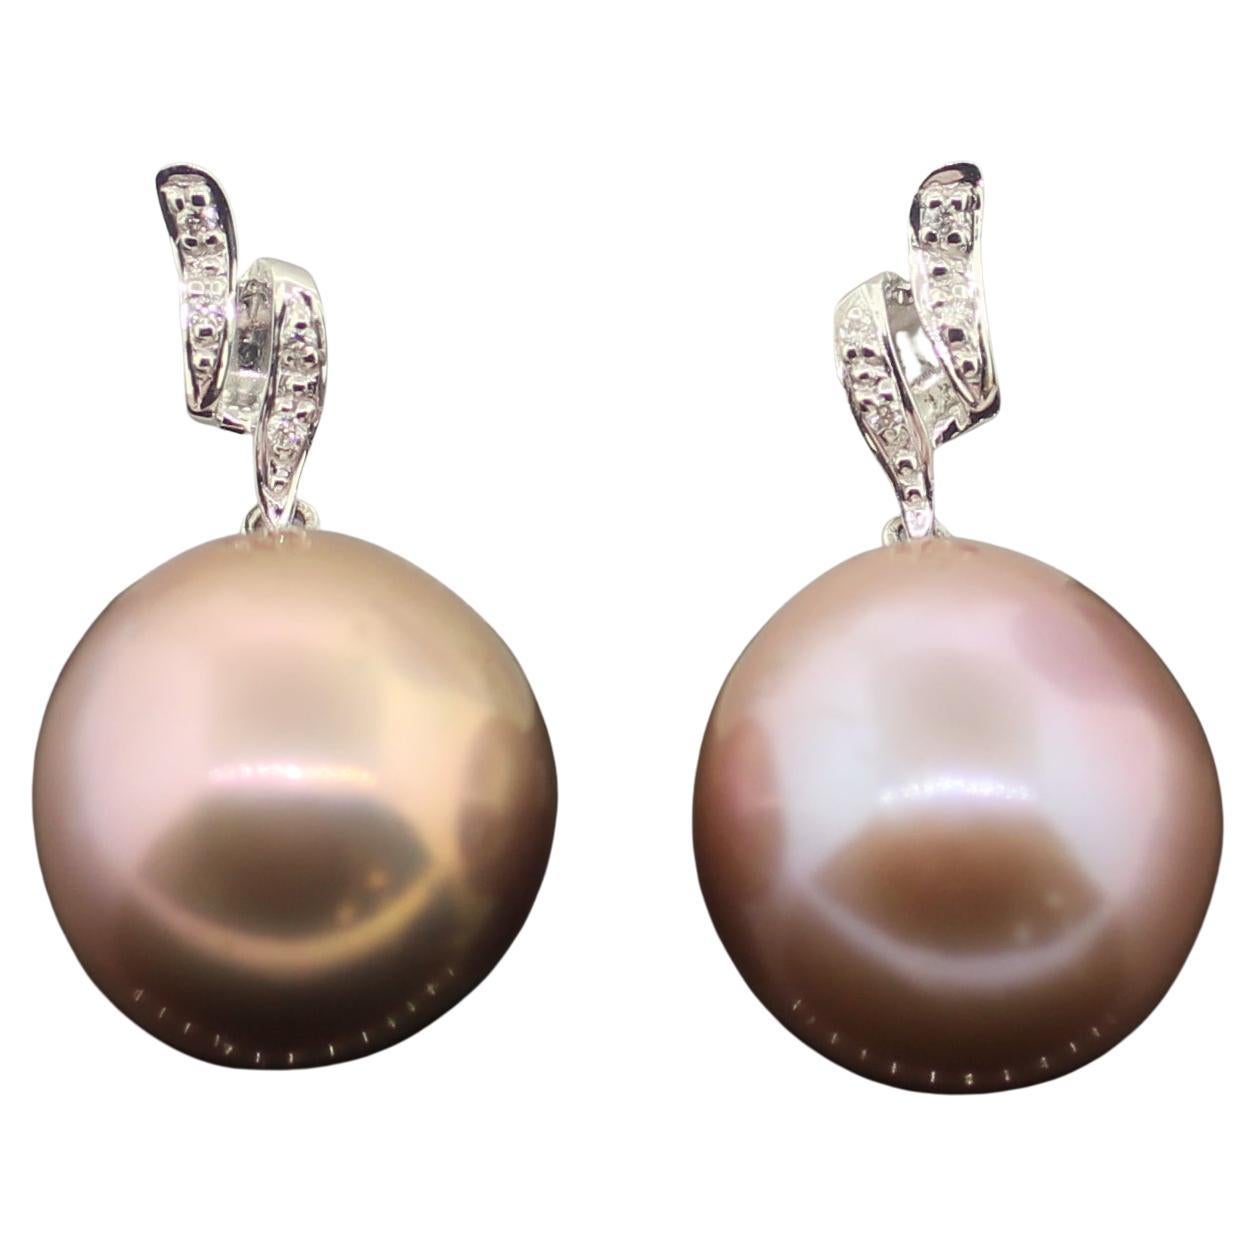 Hakimoto By Jewel Of Ocean
18K White Gold And Diamonds
Total item weight 9.5 grams
14 mm Cultured Baroque Cultured Pearls
18K White Gold High Polish
Orient: Very Good
Luster: Very Good
Nacre: Very Good
Manufacture Suggested Retail Price $3,000